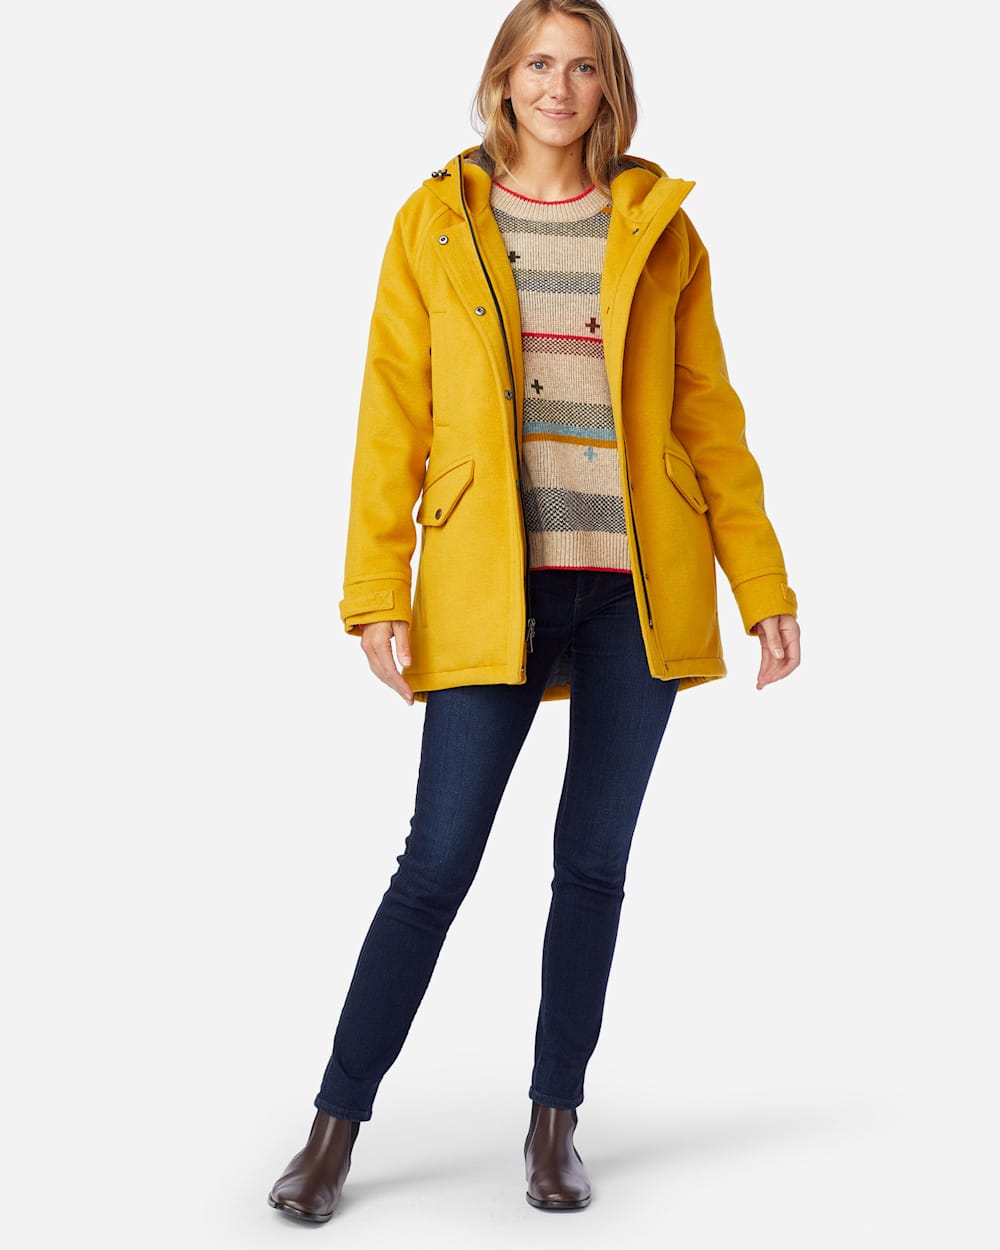 ALTERNATE VIEW OF WOMEN'S WEST HAVEN INSULATED COAT IN GOLDENROD image number 4